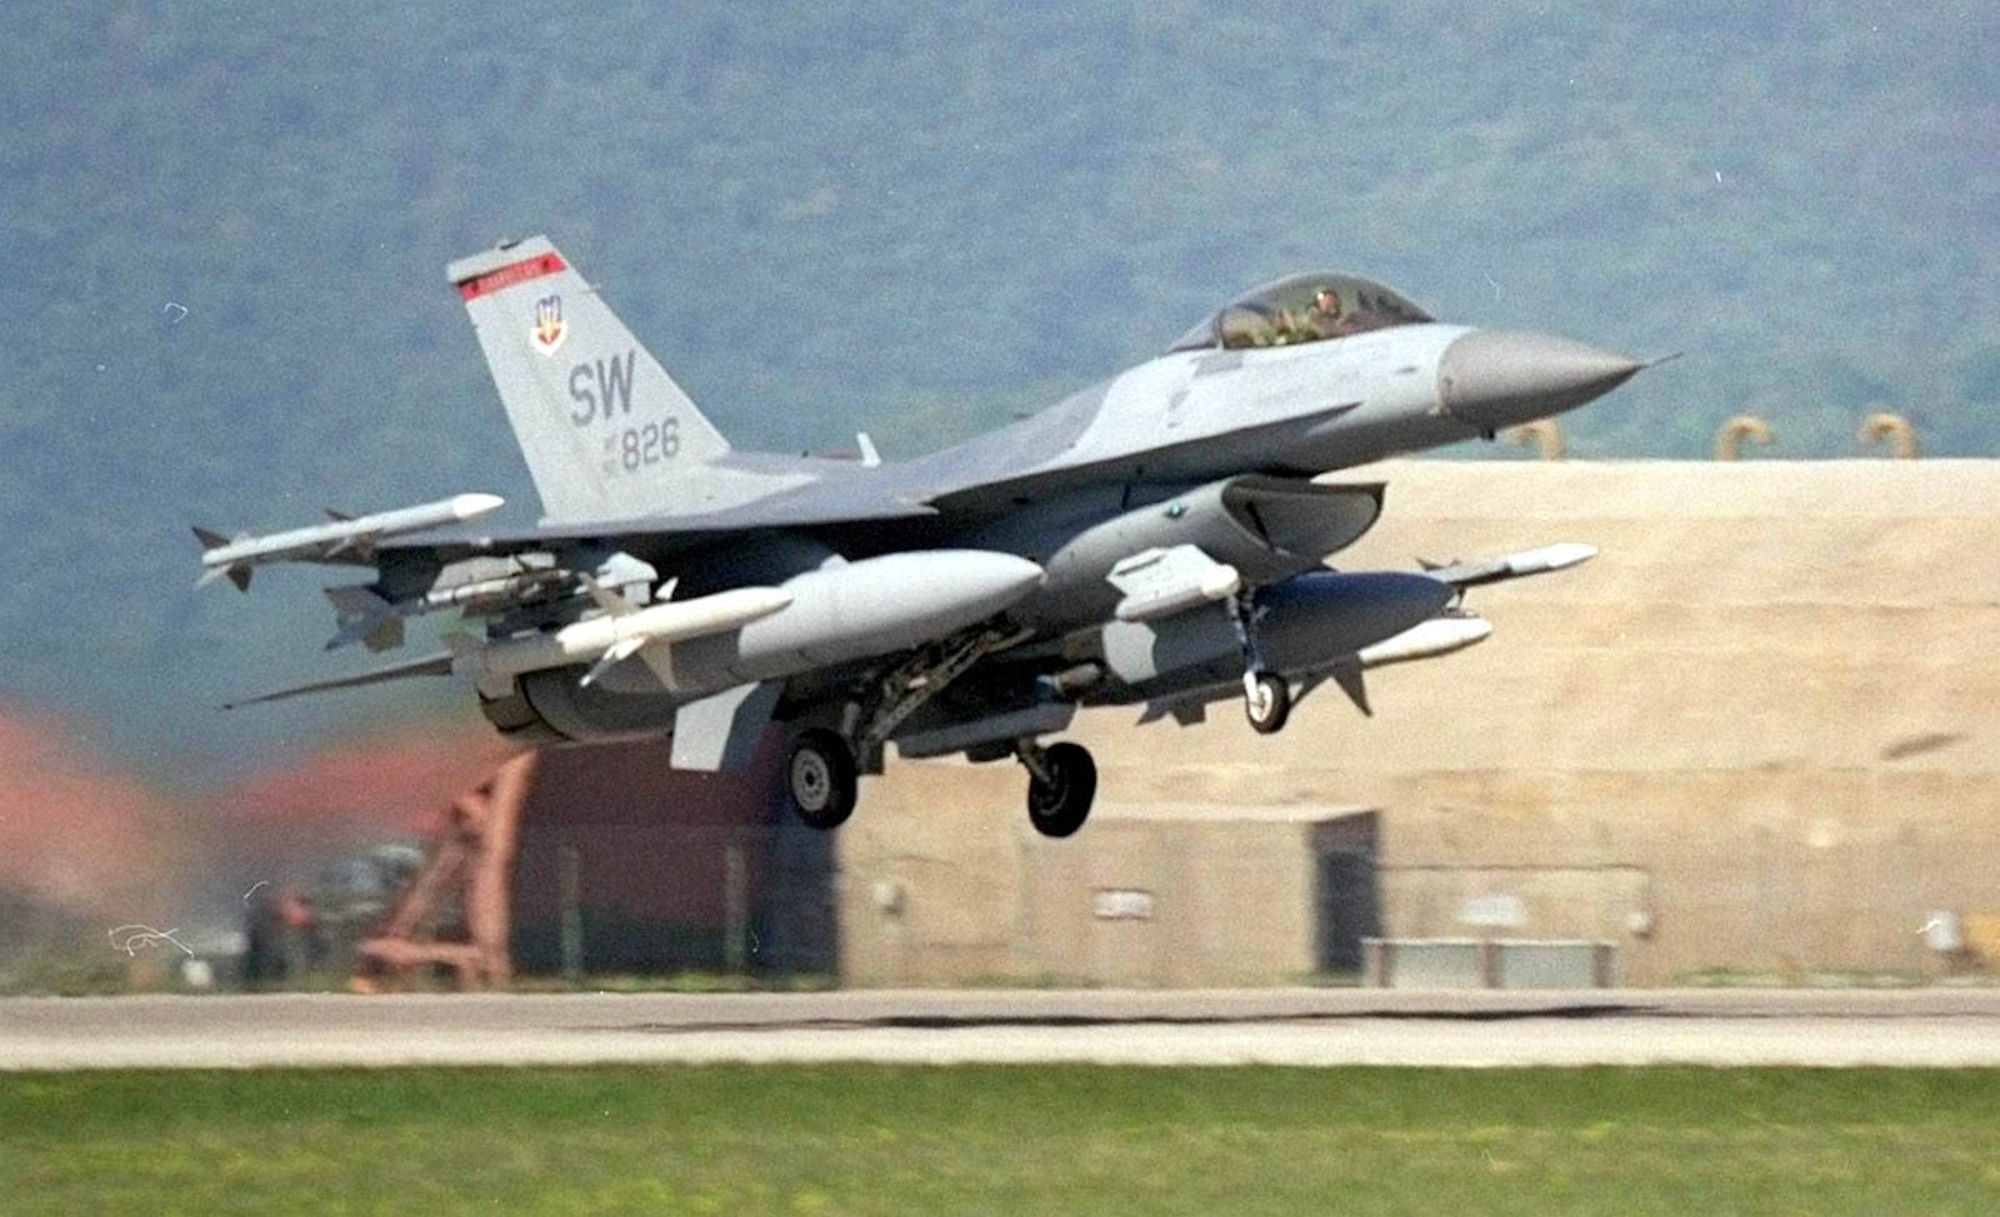 AVIANO AIR BASE, Italy -- An F-16 Fighting Falcon from Shaw Air Force Base, S.C., takes off from here. The F-16 is one of more than 170 aircraft deployed to Italy in support of NATO's Operation Allied Force. (Photo by Senior Airman Delia A. Castillo)
